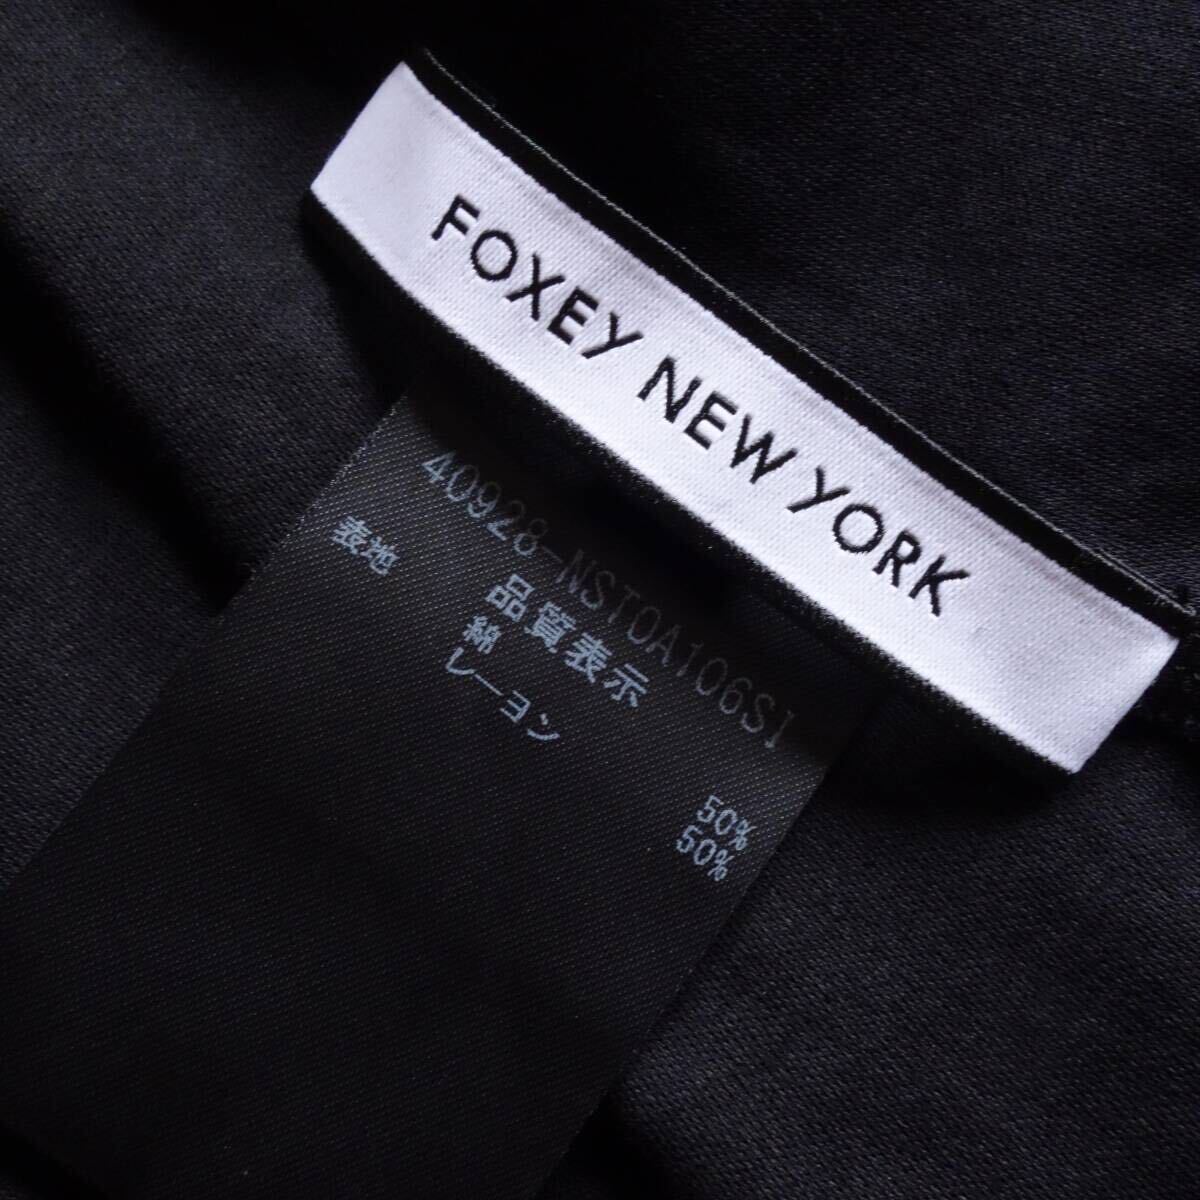 FOXEY NY 42 袖プチリボン 黒 カットソー_画像6